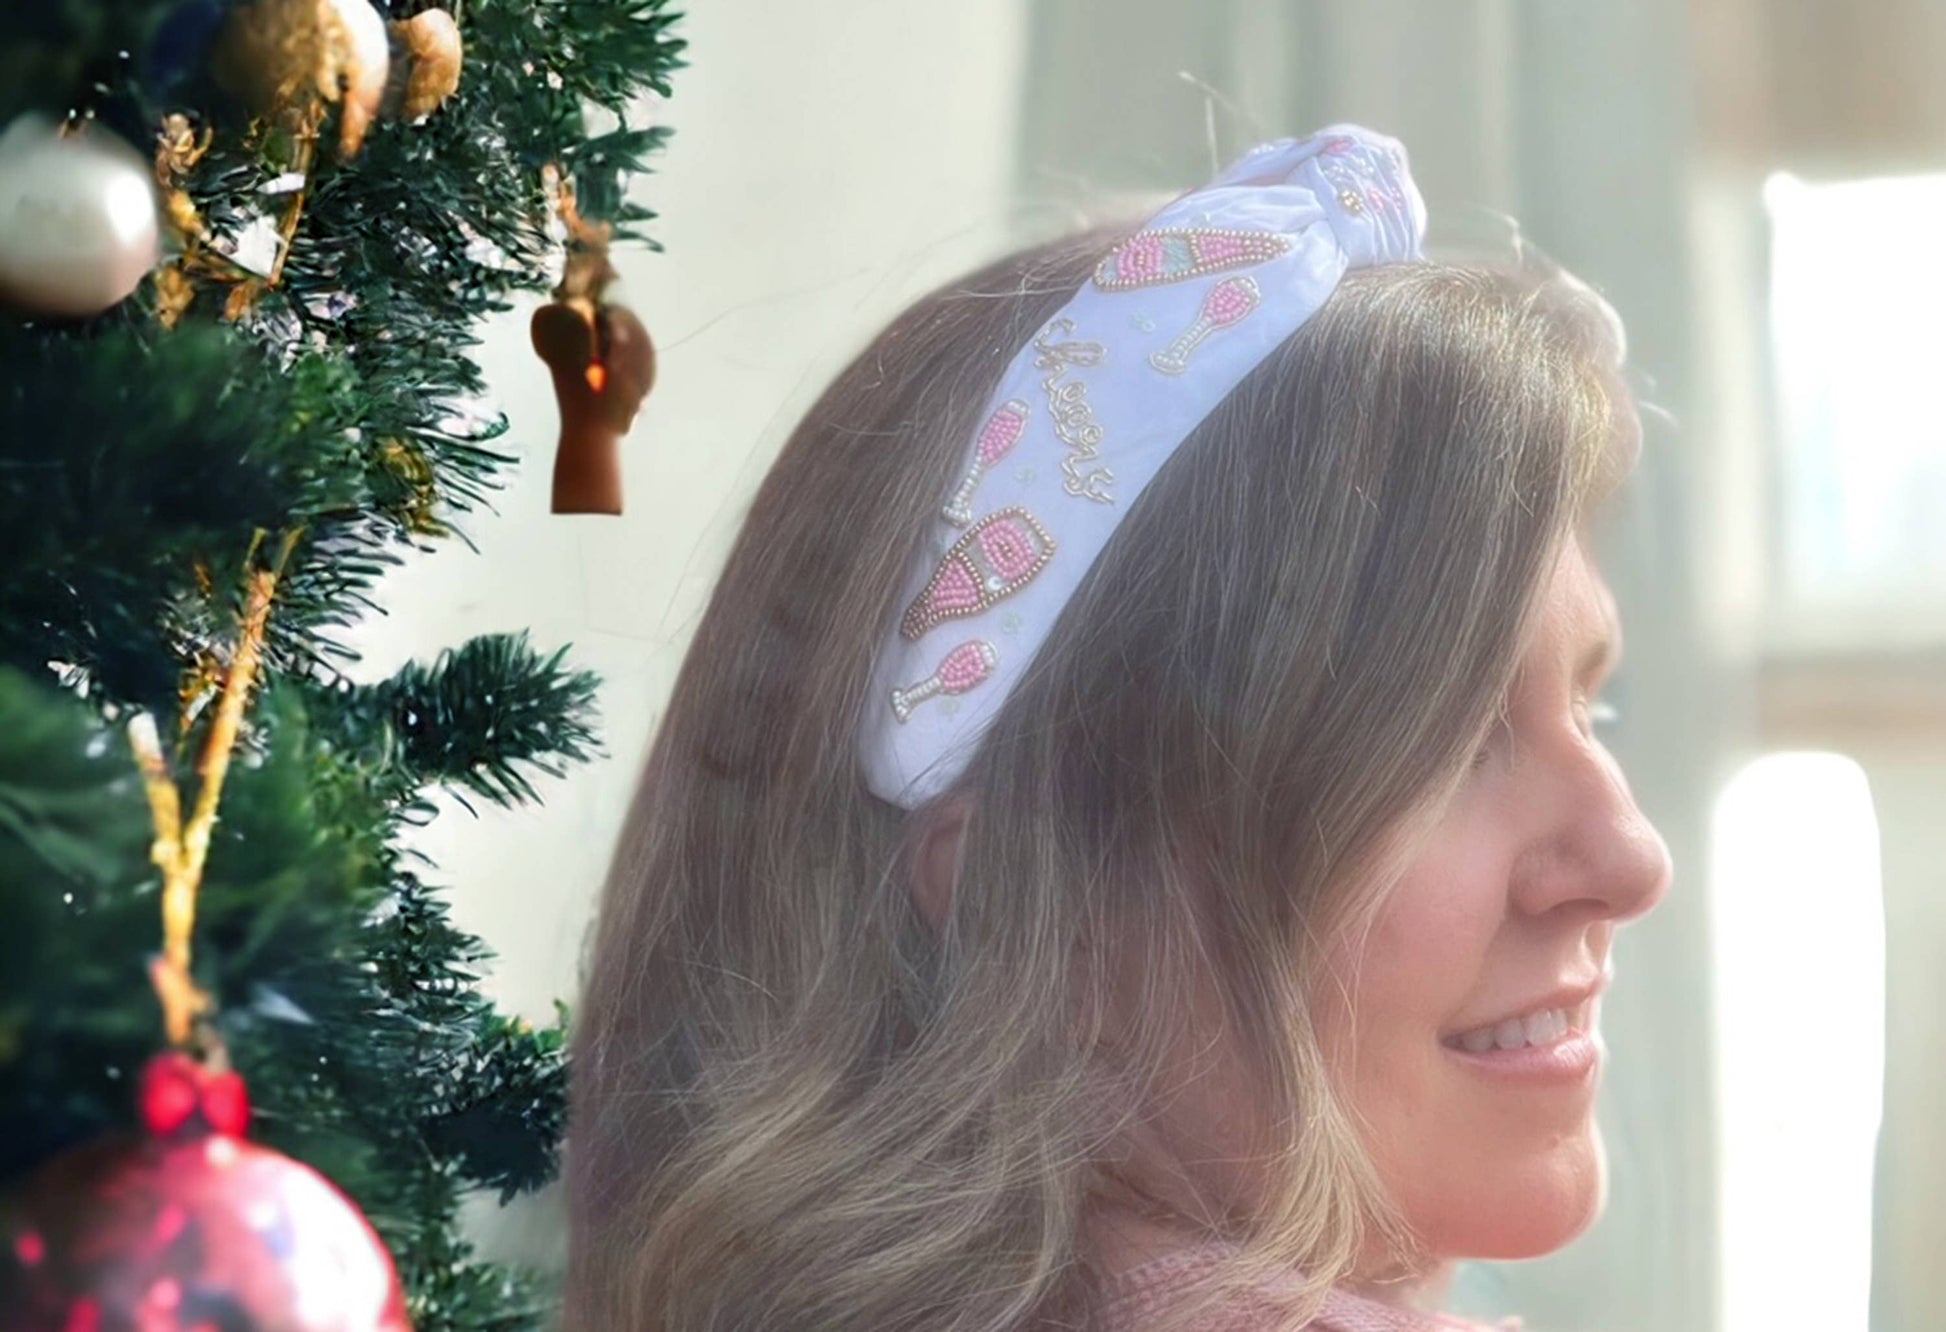 A woman wearing a Bash Festive Beaded Christmas Headband in front of a Christmas tree.